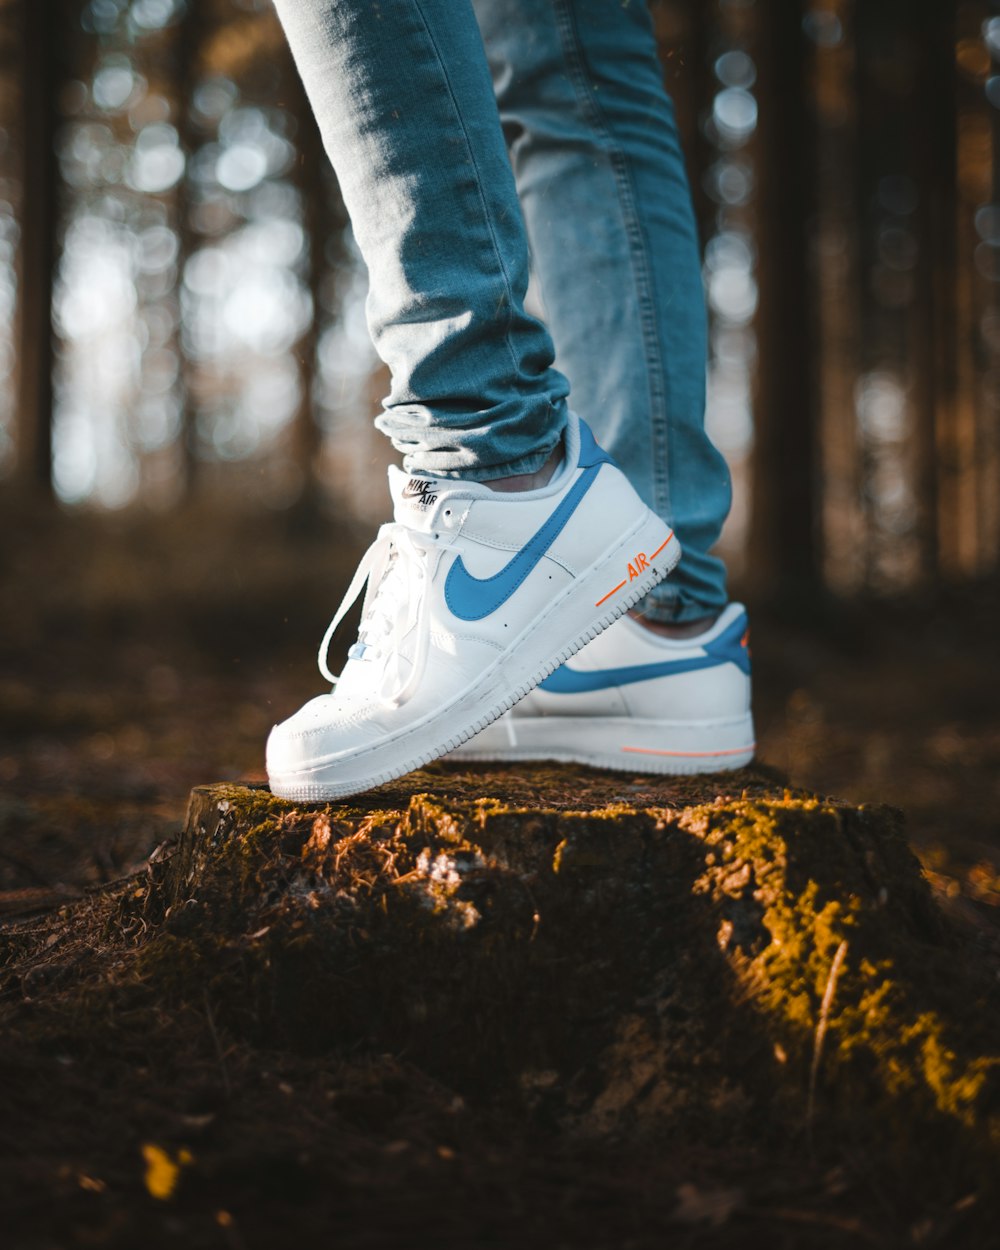 Person wearing blue denim jeans and white nike air max shoes standing on  tree stomp photo – Free Sun Image on Unsplash